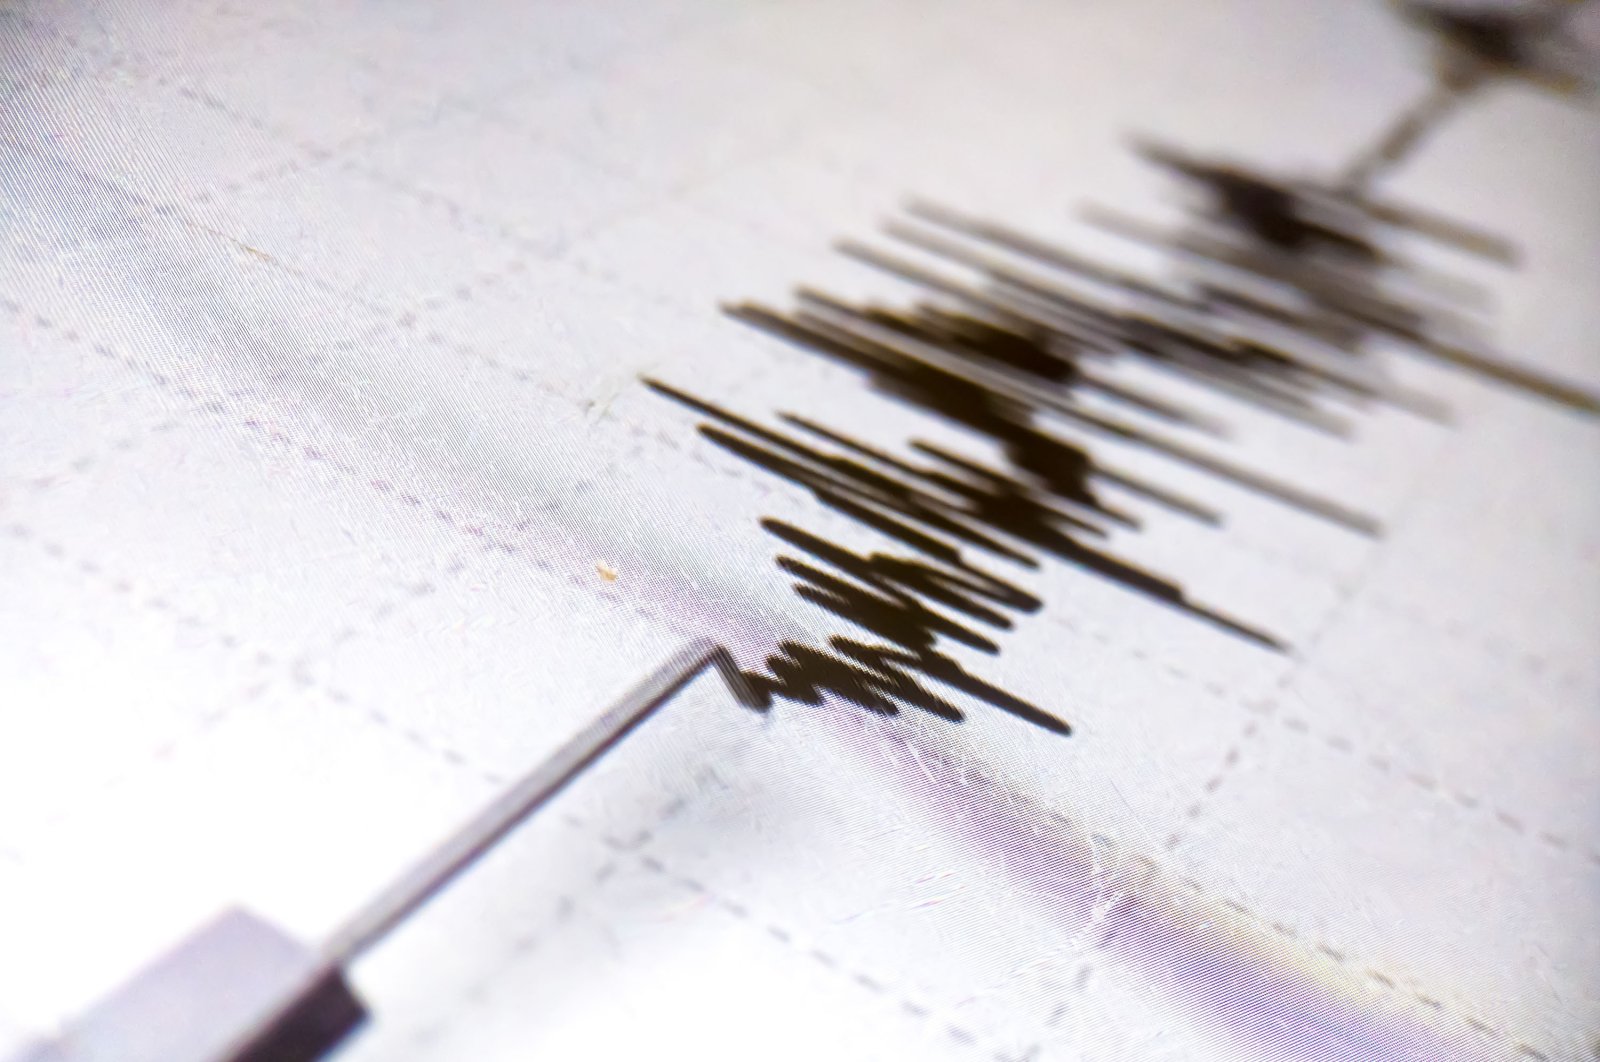 Richter scale Low and High Earthquake Waves with Vibration on white paper background. (Shutterstock File Photo)